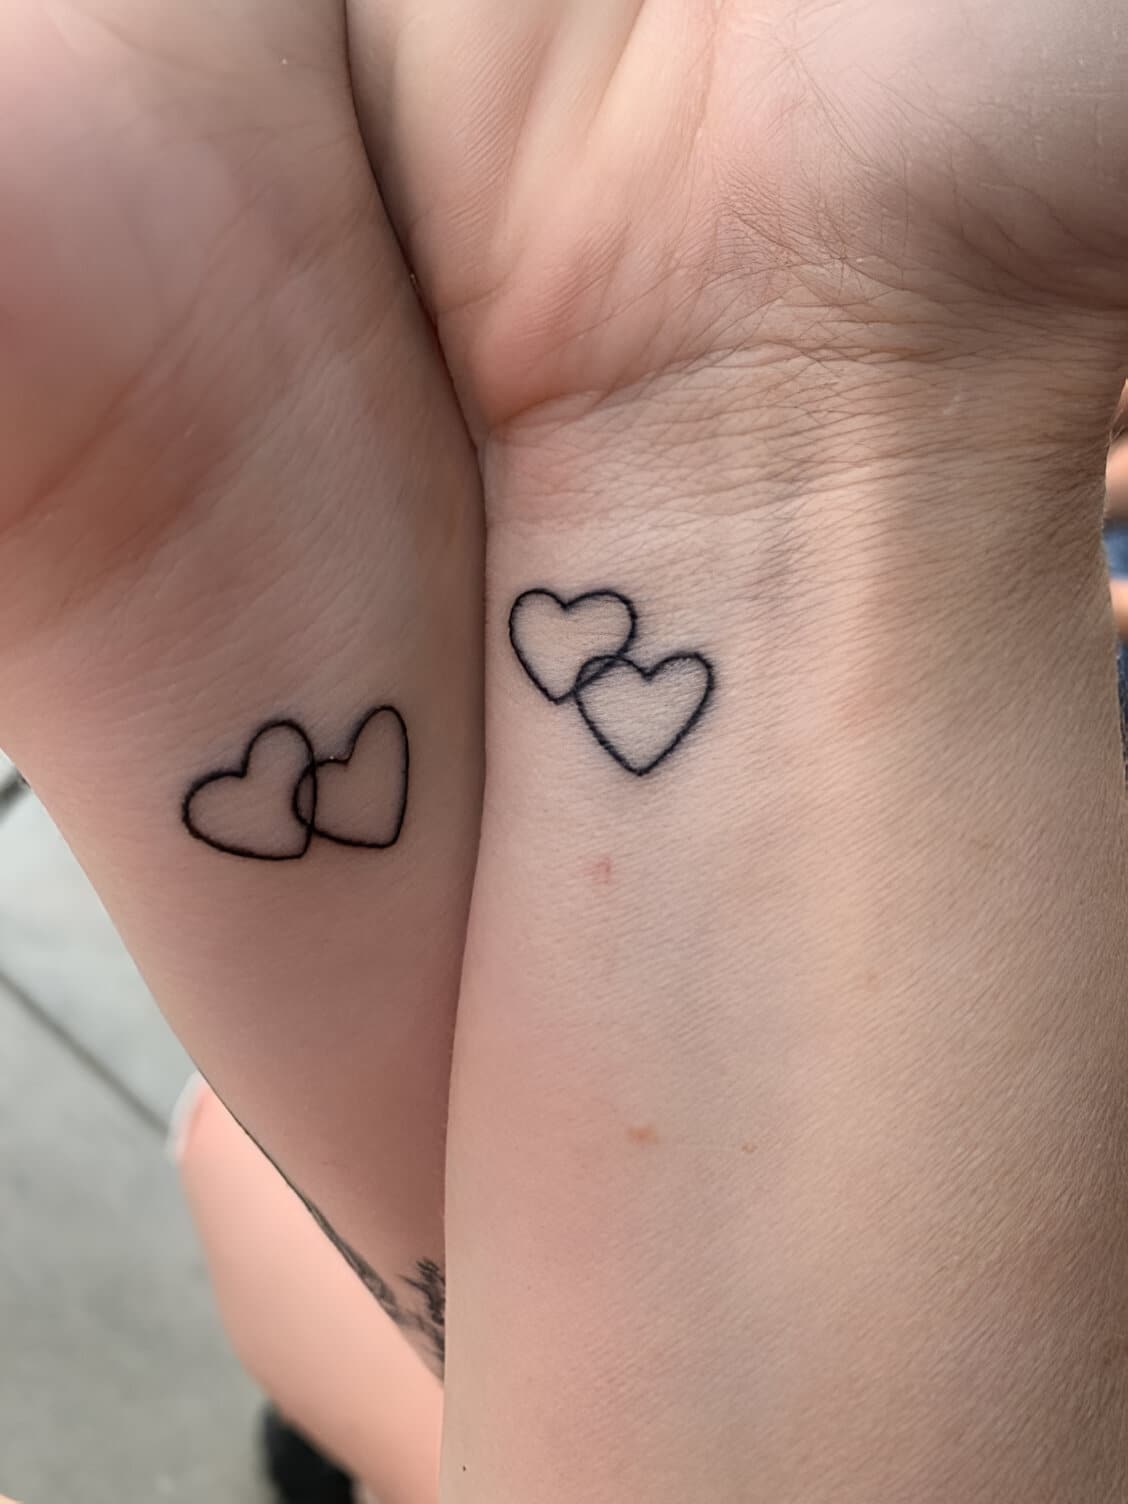 30 Elegant Matching Heart Tattoos To Get With Your Partner ASAP 16